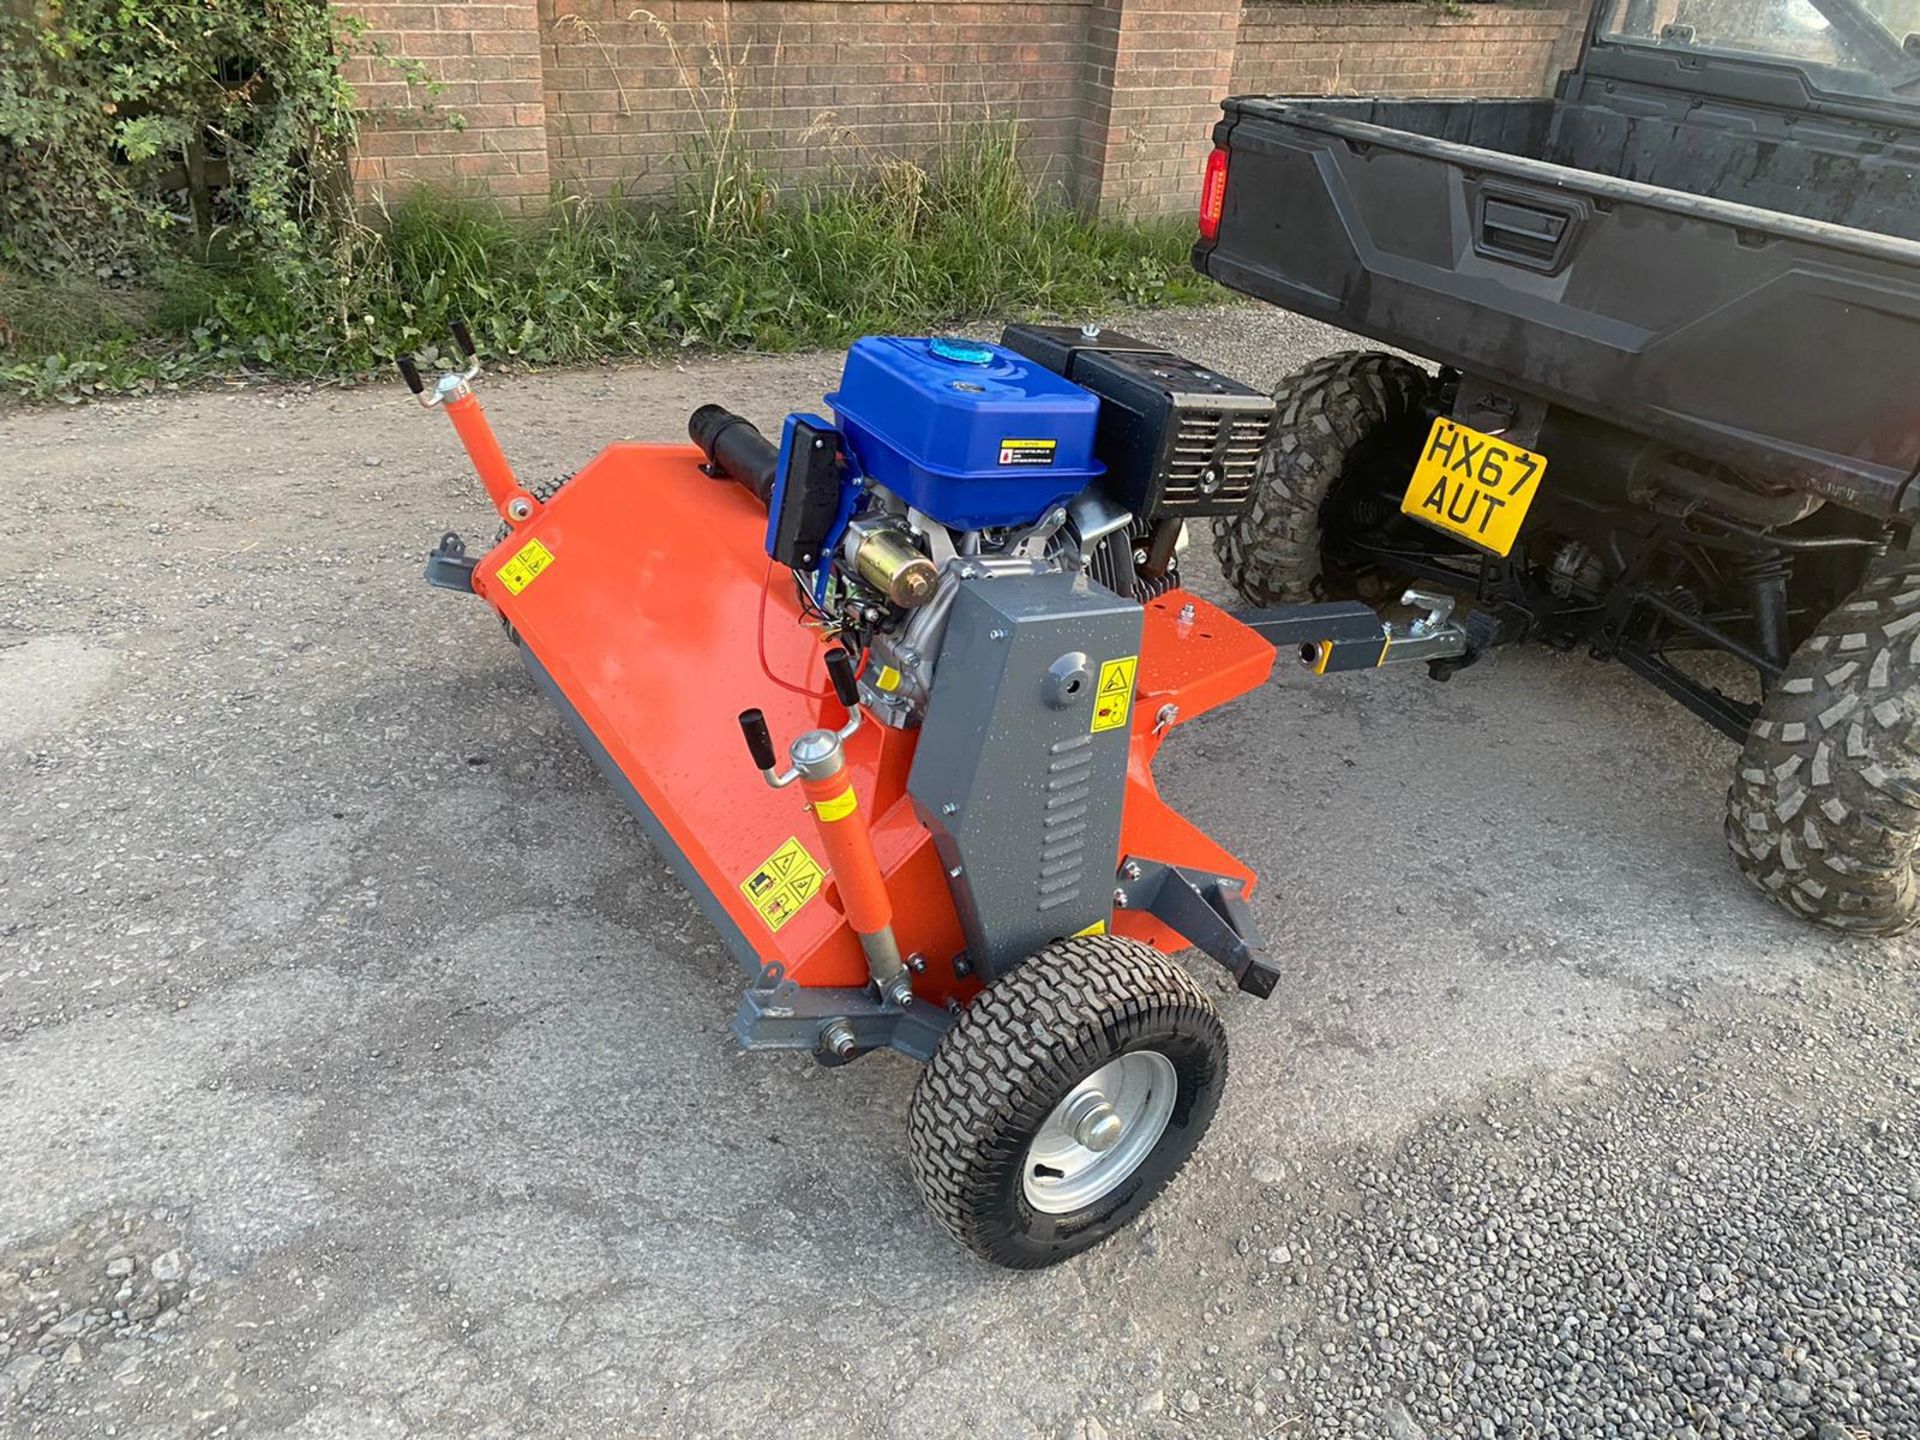 NEW AND UNUSED 1.2 METRE SINGLE AXLE FAST TOW FLAIL MOWER, SUITABLE FOR ATV / UTILITY VEHICLE - Image 3 of 8